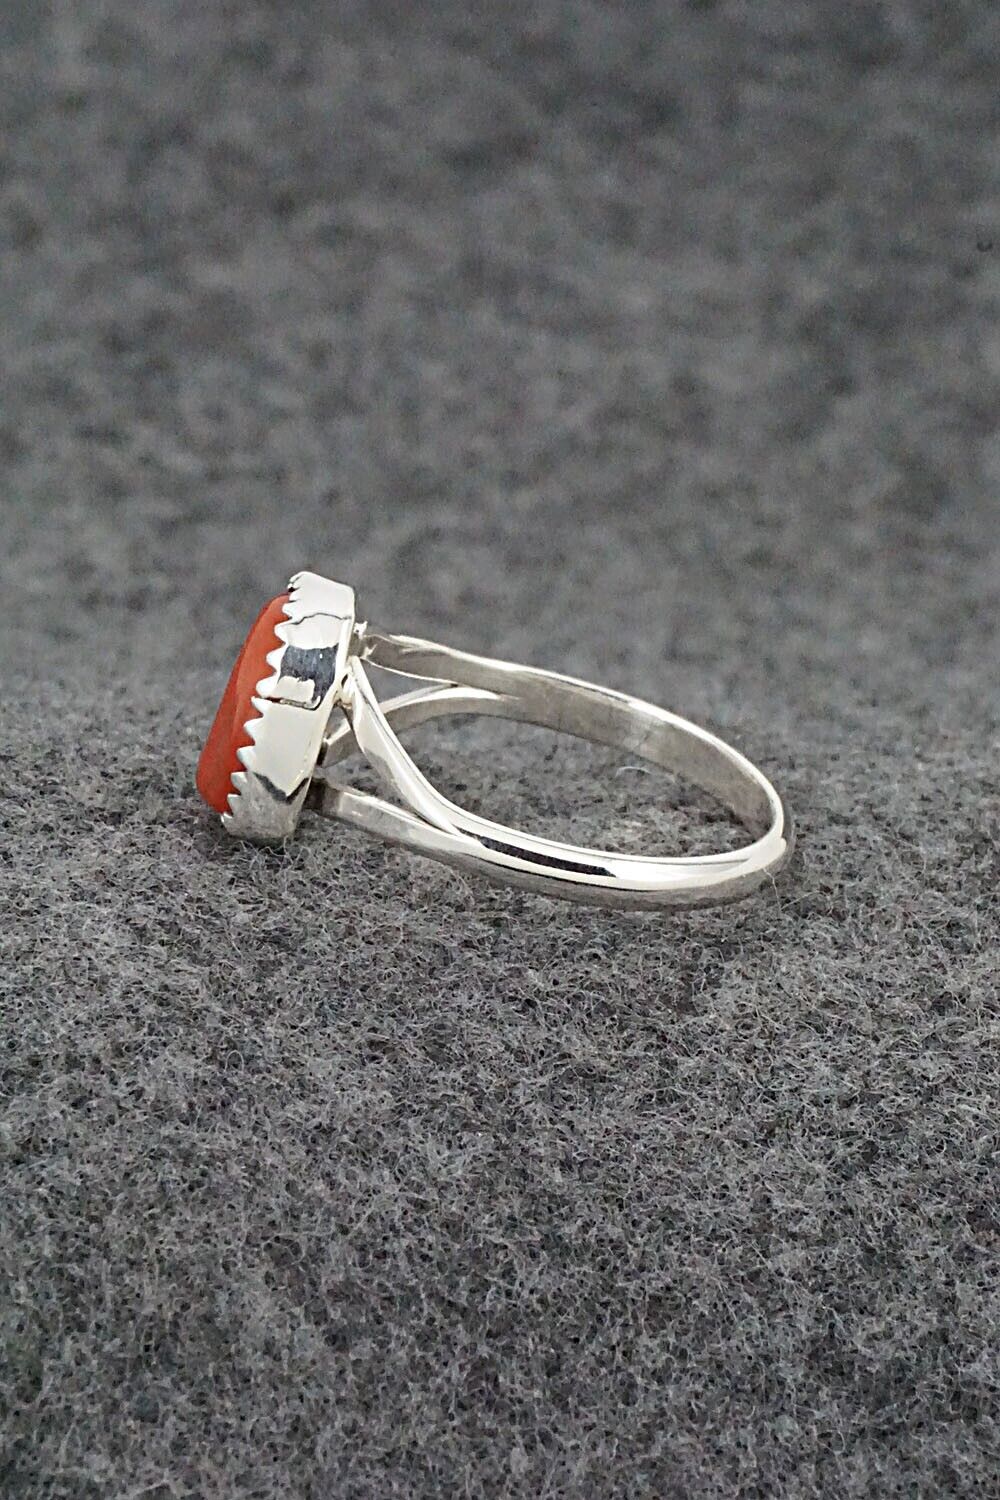 Coral & Sterling Silver Ring - Letricia Largo - Size 8.25